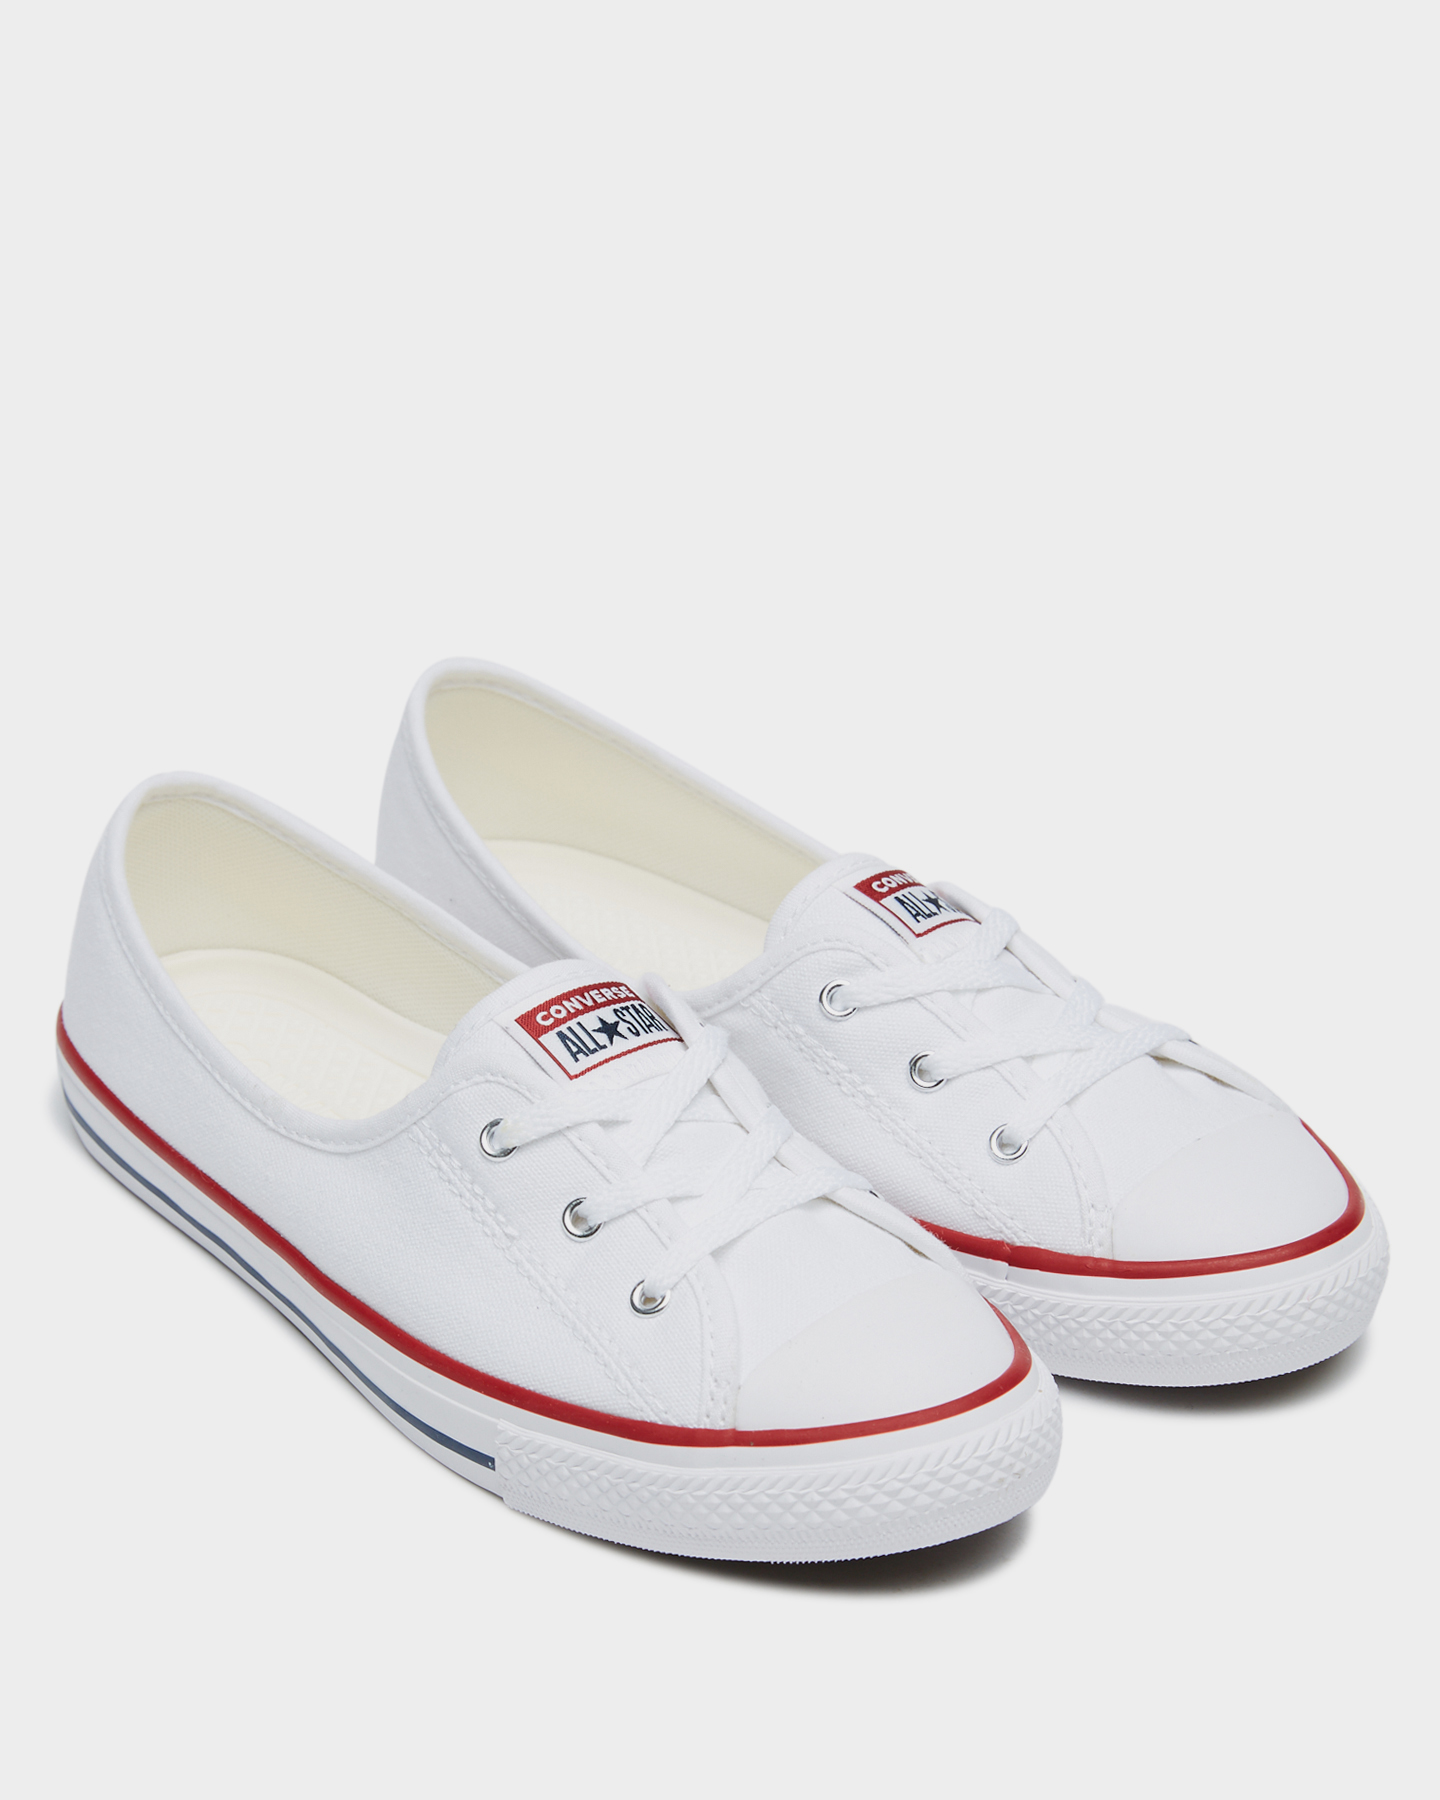 Hervat Cornwall filter Converse Womens Chuck Taylor All Star Ballet Lace Shoe - White | SurfStitch